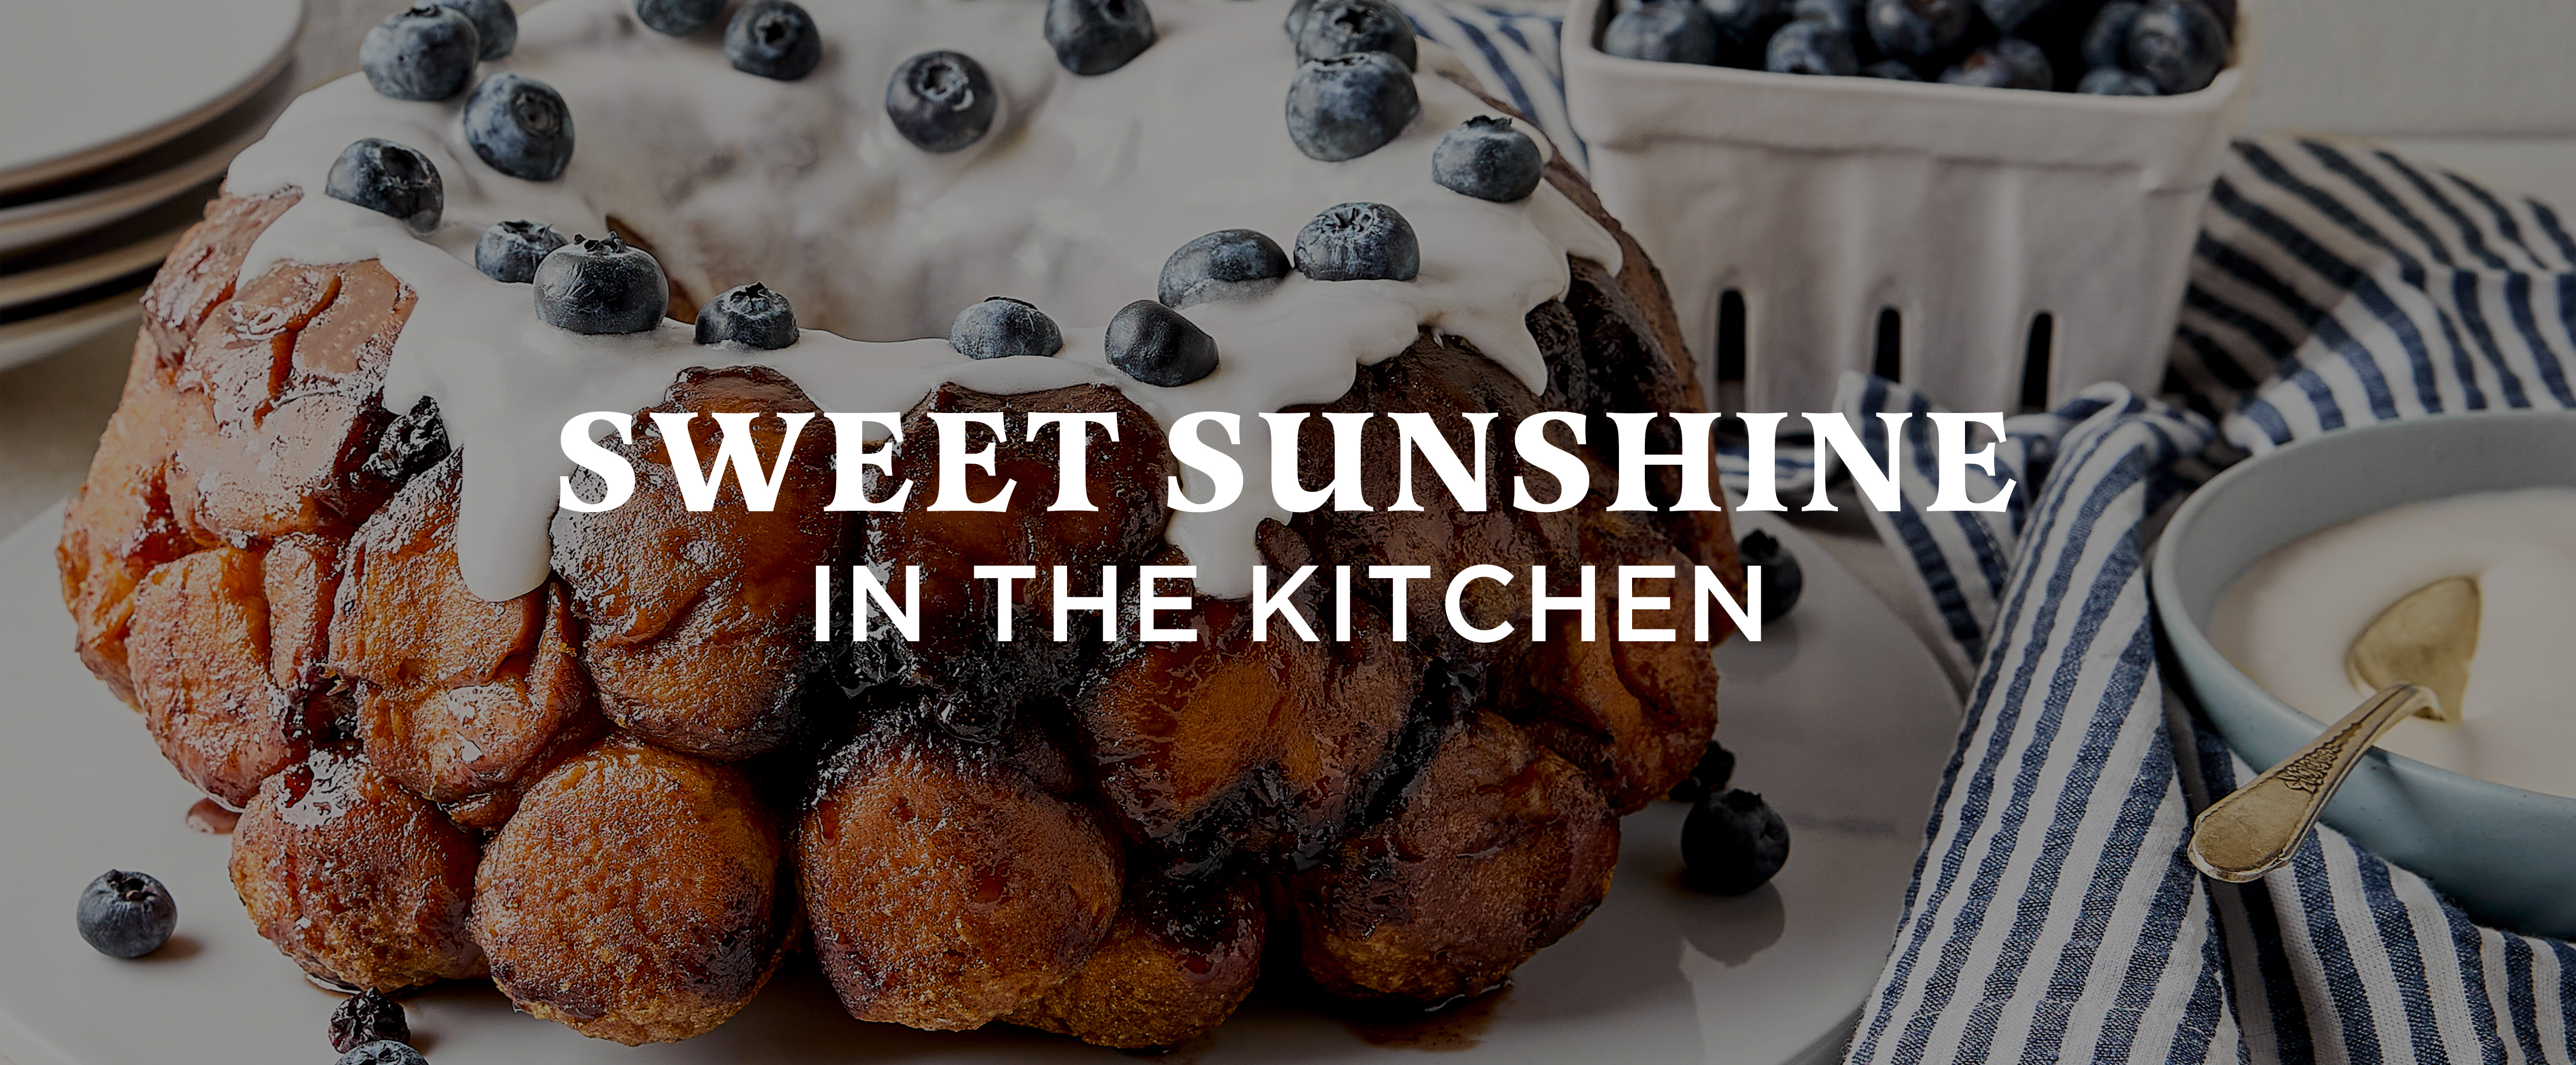 Blueberry Monkey Bread with text Sweet Sunshine in the Kitchen